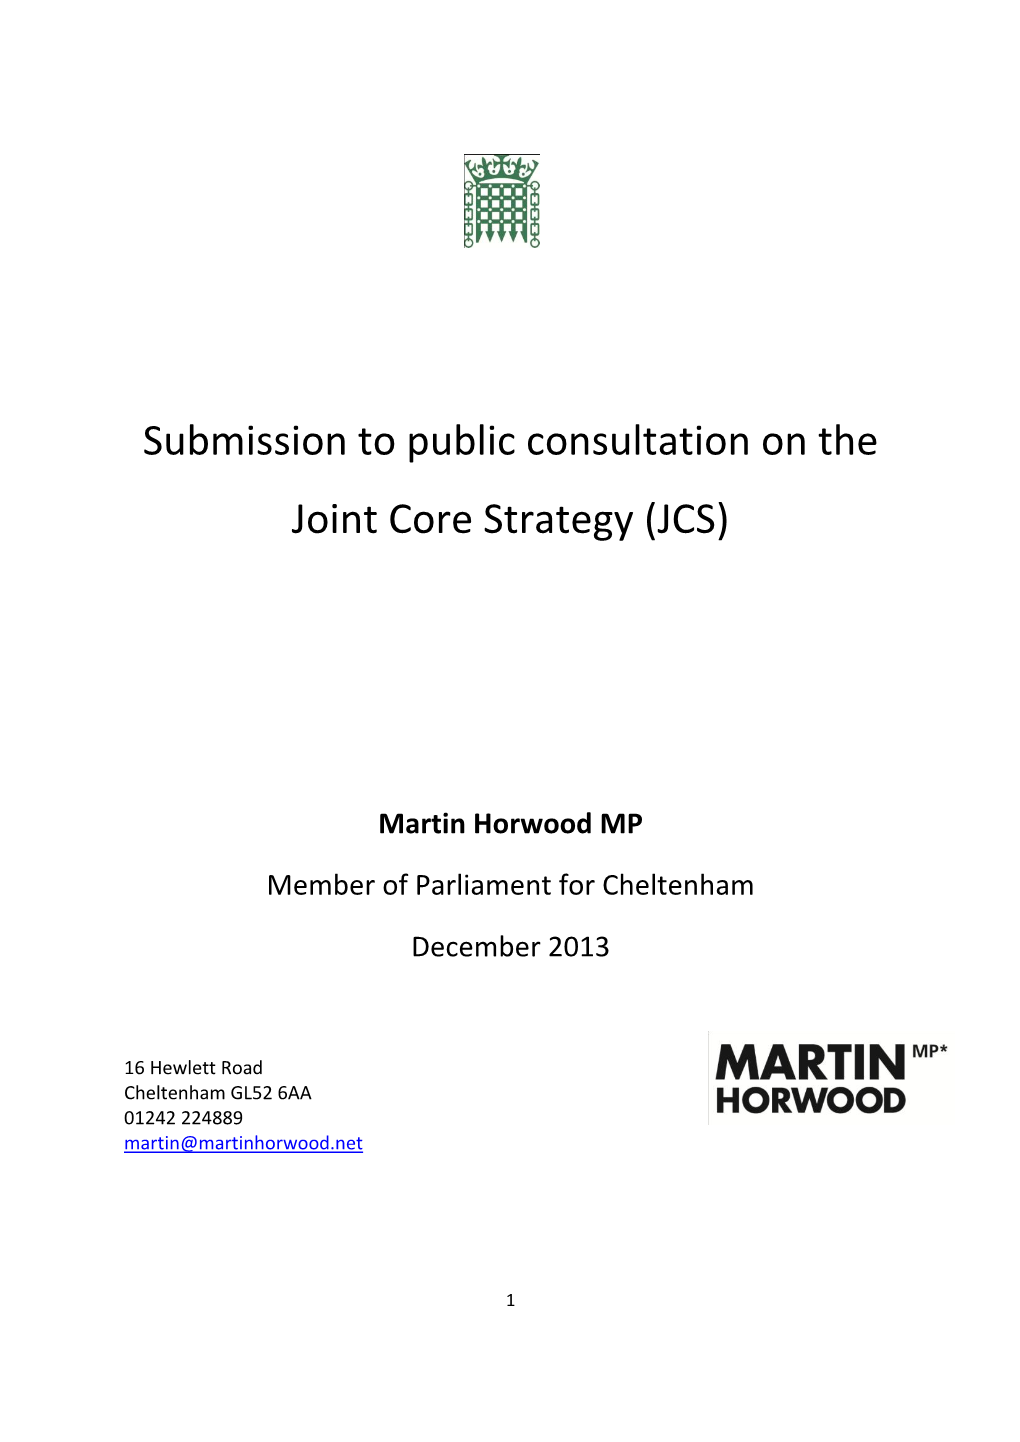 Submission to Public Consultation on the Joint Core Strategy (JCS)